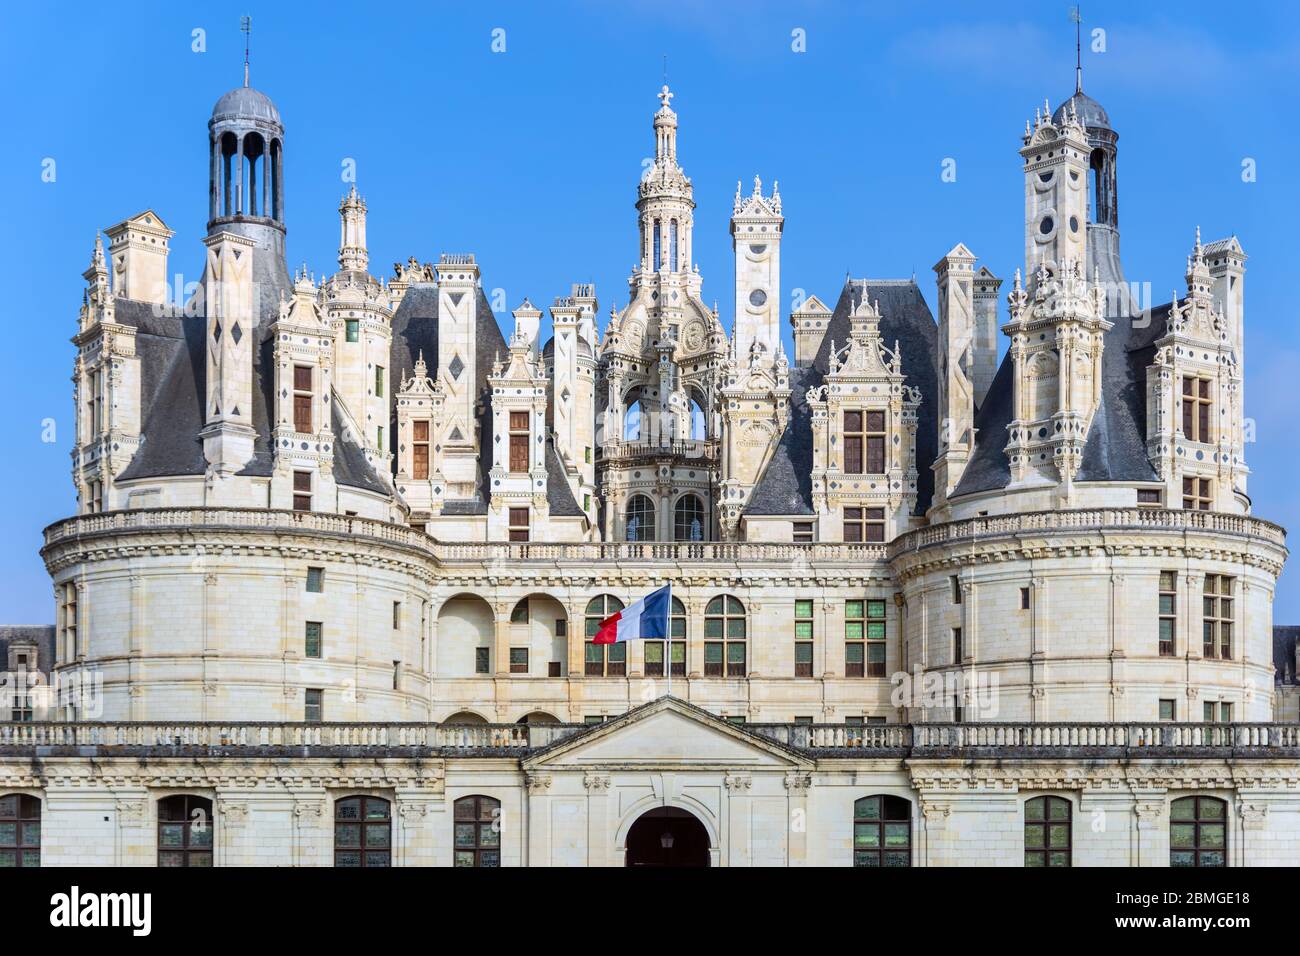 Chateau de Chambord in the Loire Valley - France Stock Photo